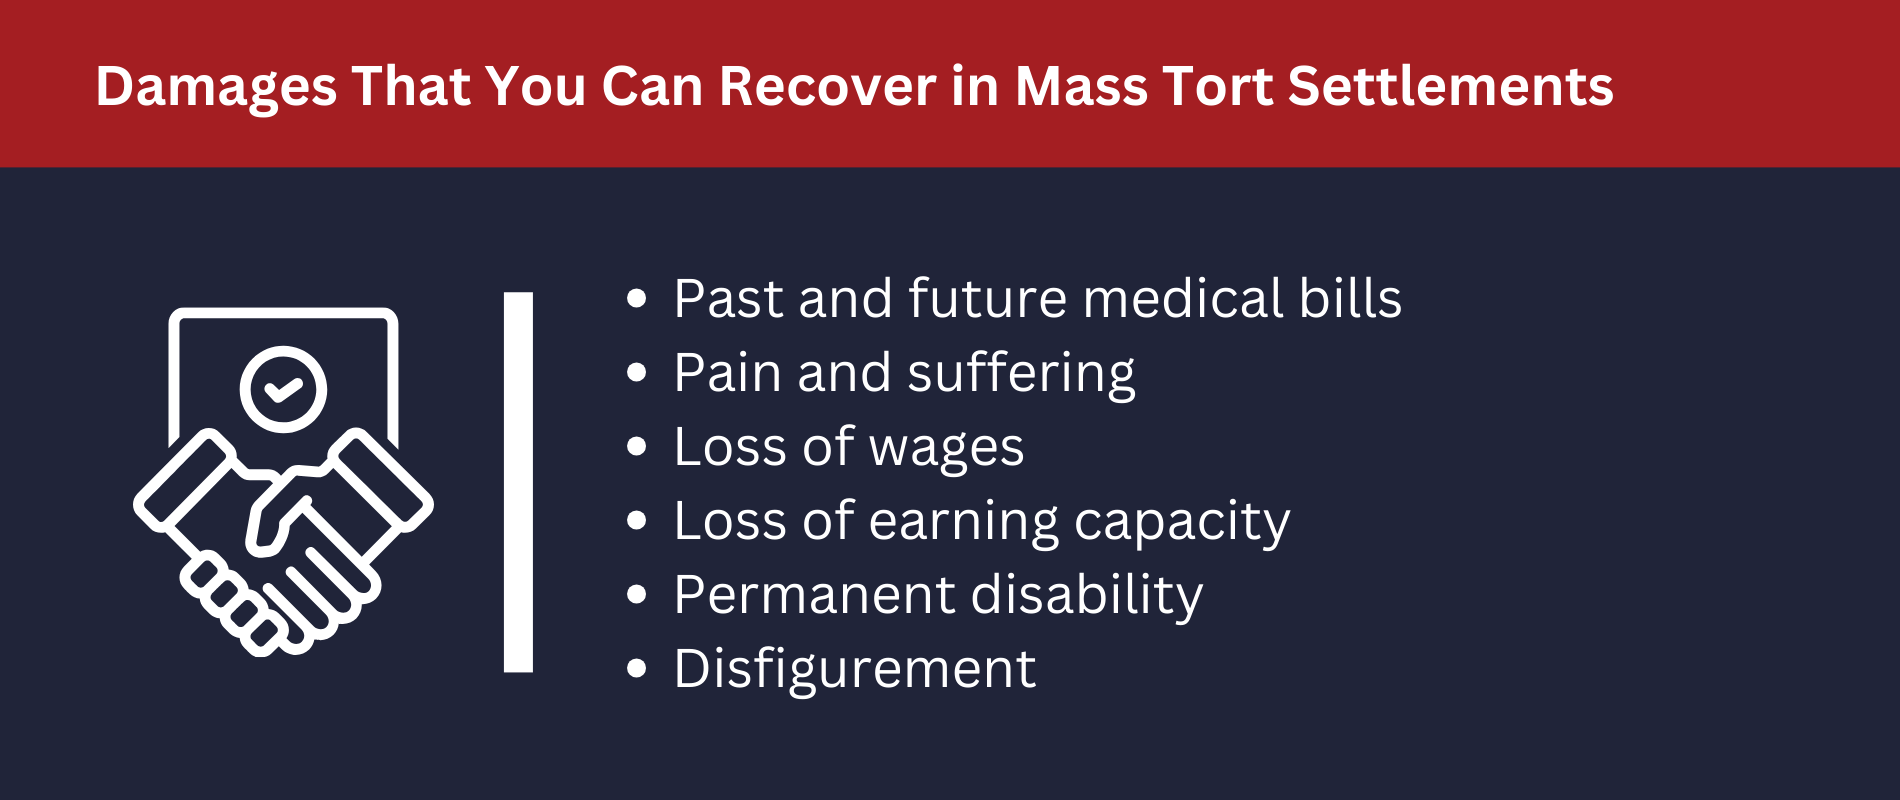 Damages That You Can Recover in Mass Tort Settlements